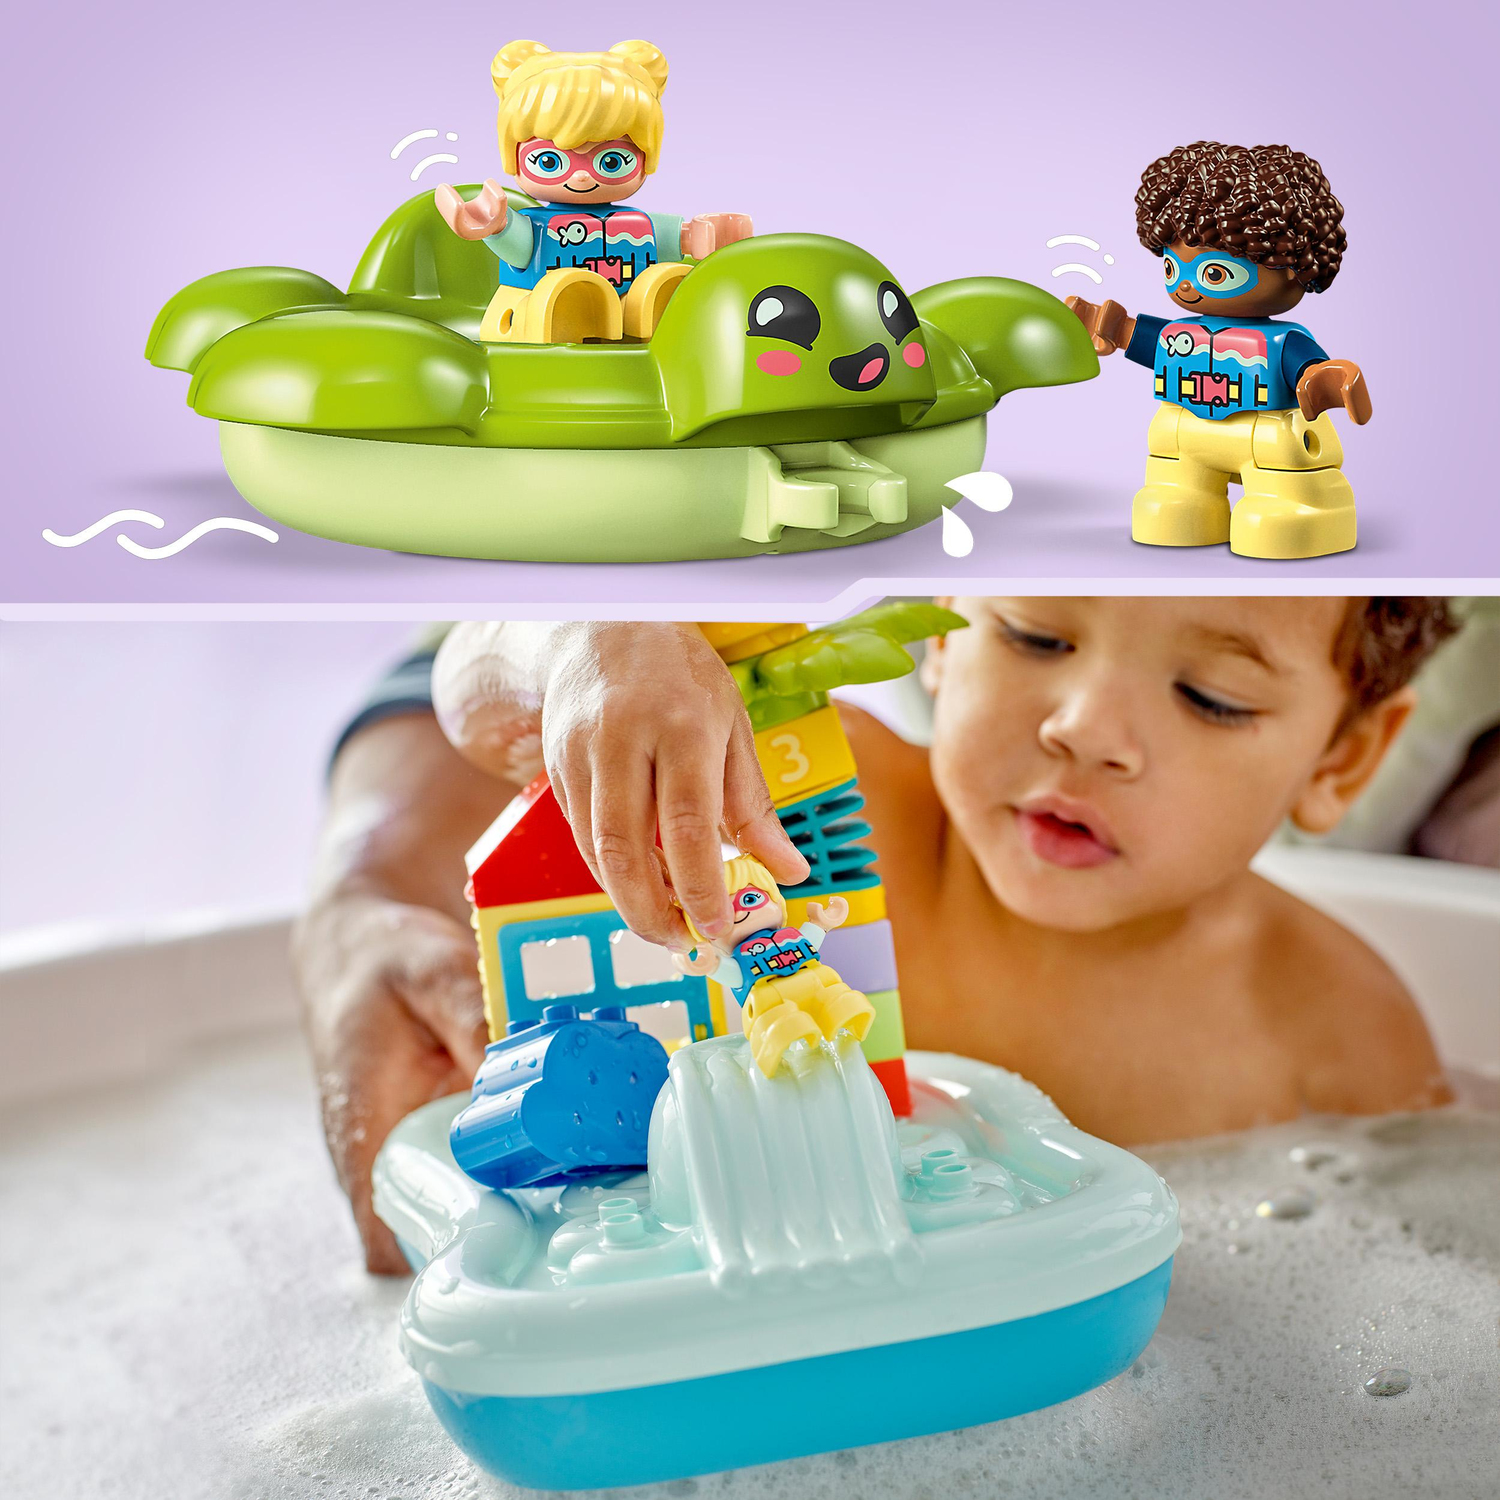 LEGO DUPLO Water Park Bath Toys for Toddlers - Imagination Toys